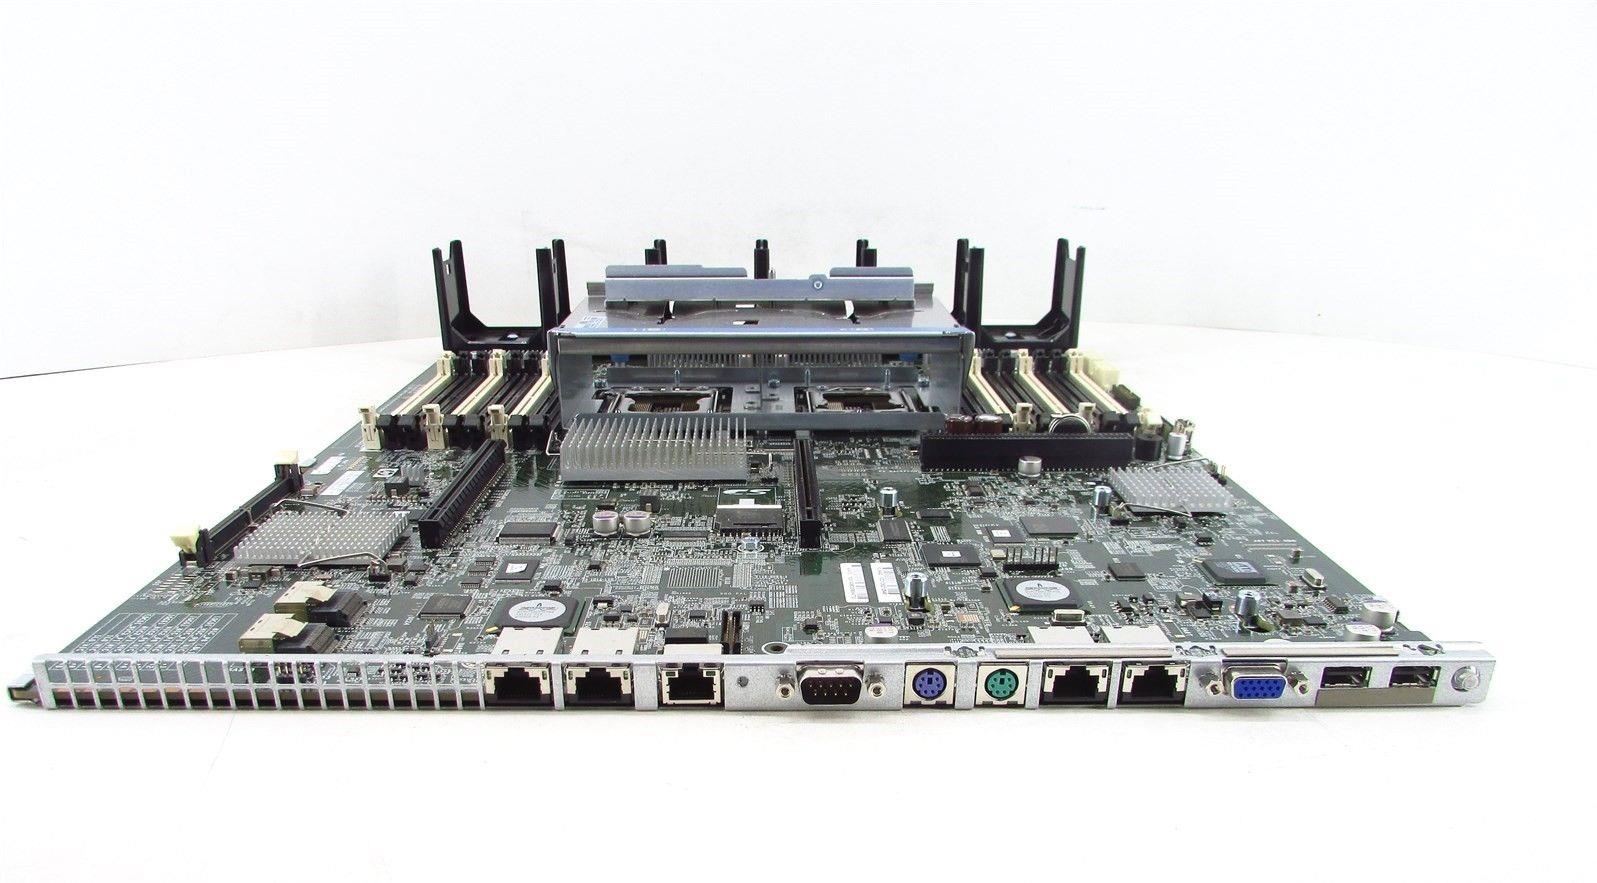  HP-496069-001-DL380-G6-Server-Motherboard-w-Tray-451277-002  HP-49606